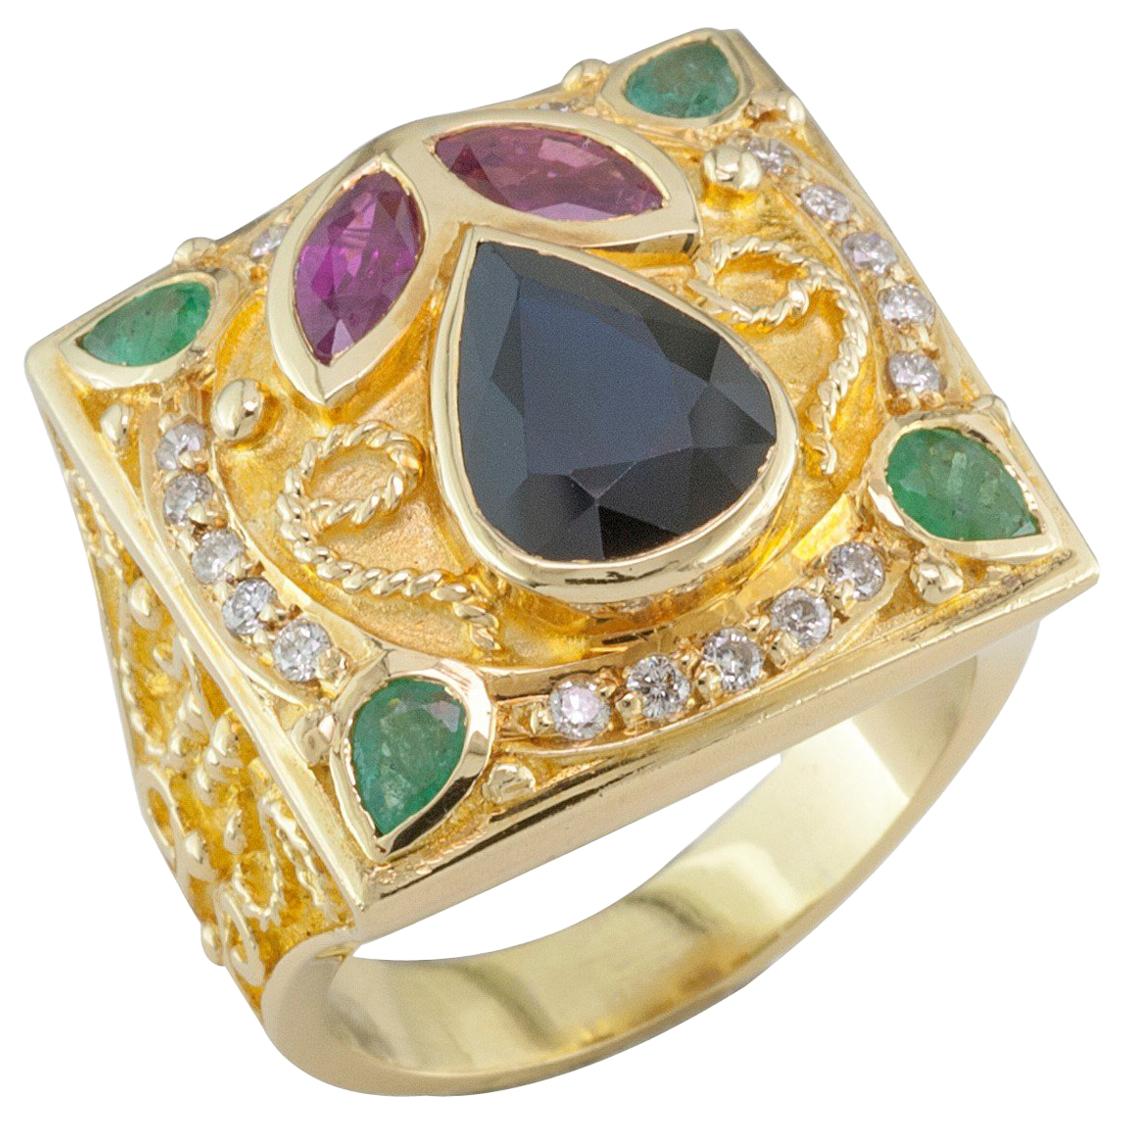 Georgios Collections 18 Karat Yellow Gold Sapphire Ring with Emeralds and Rubies